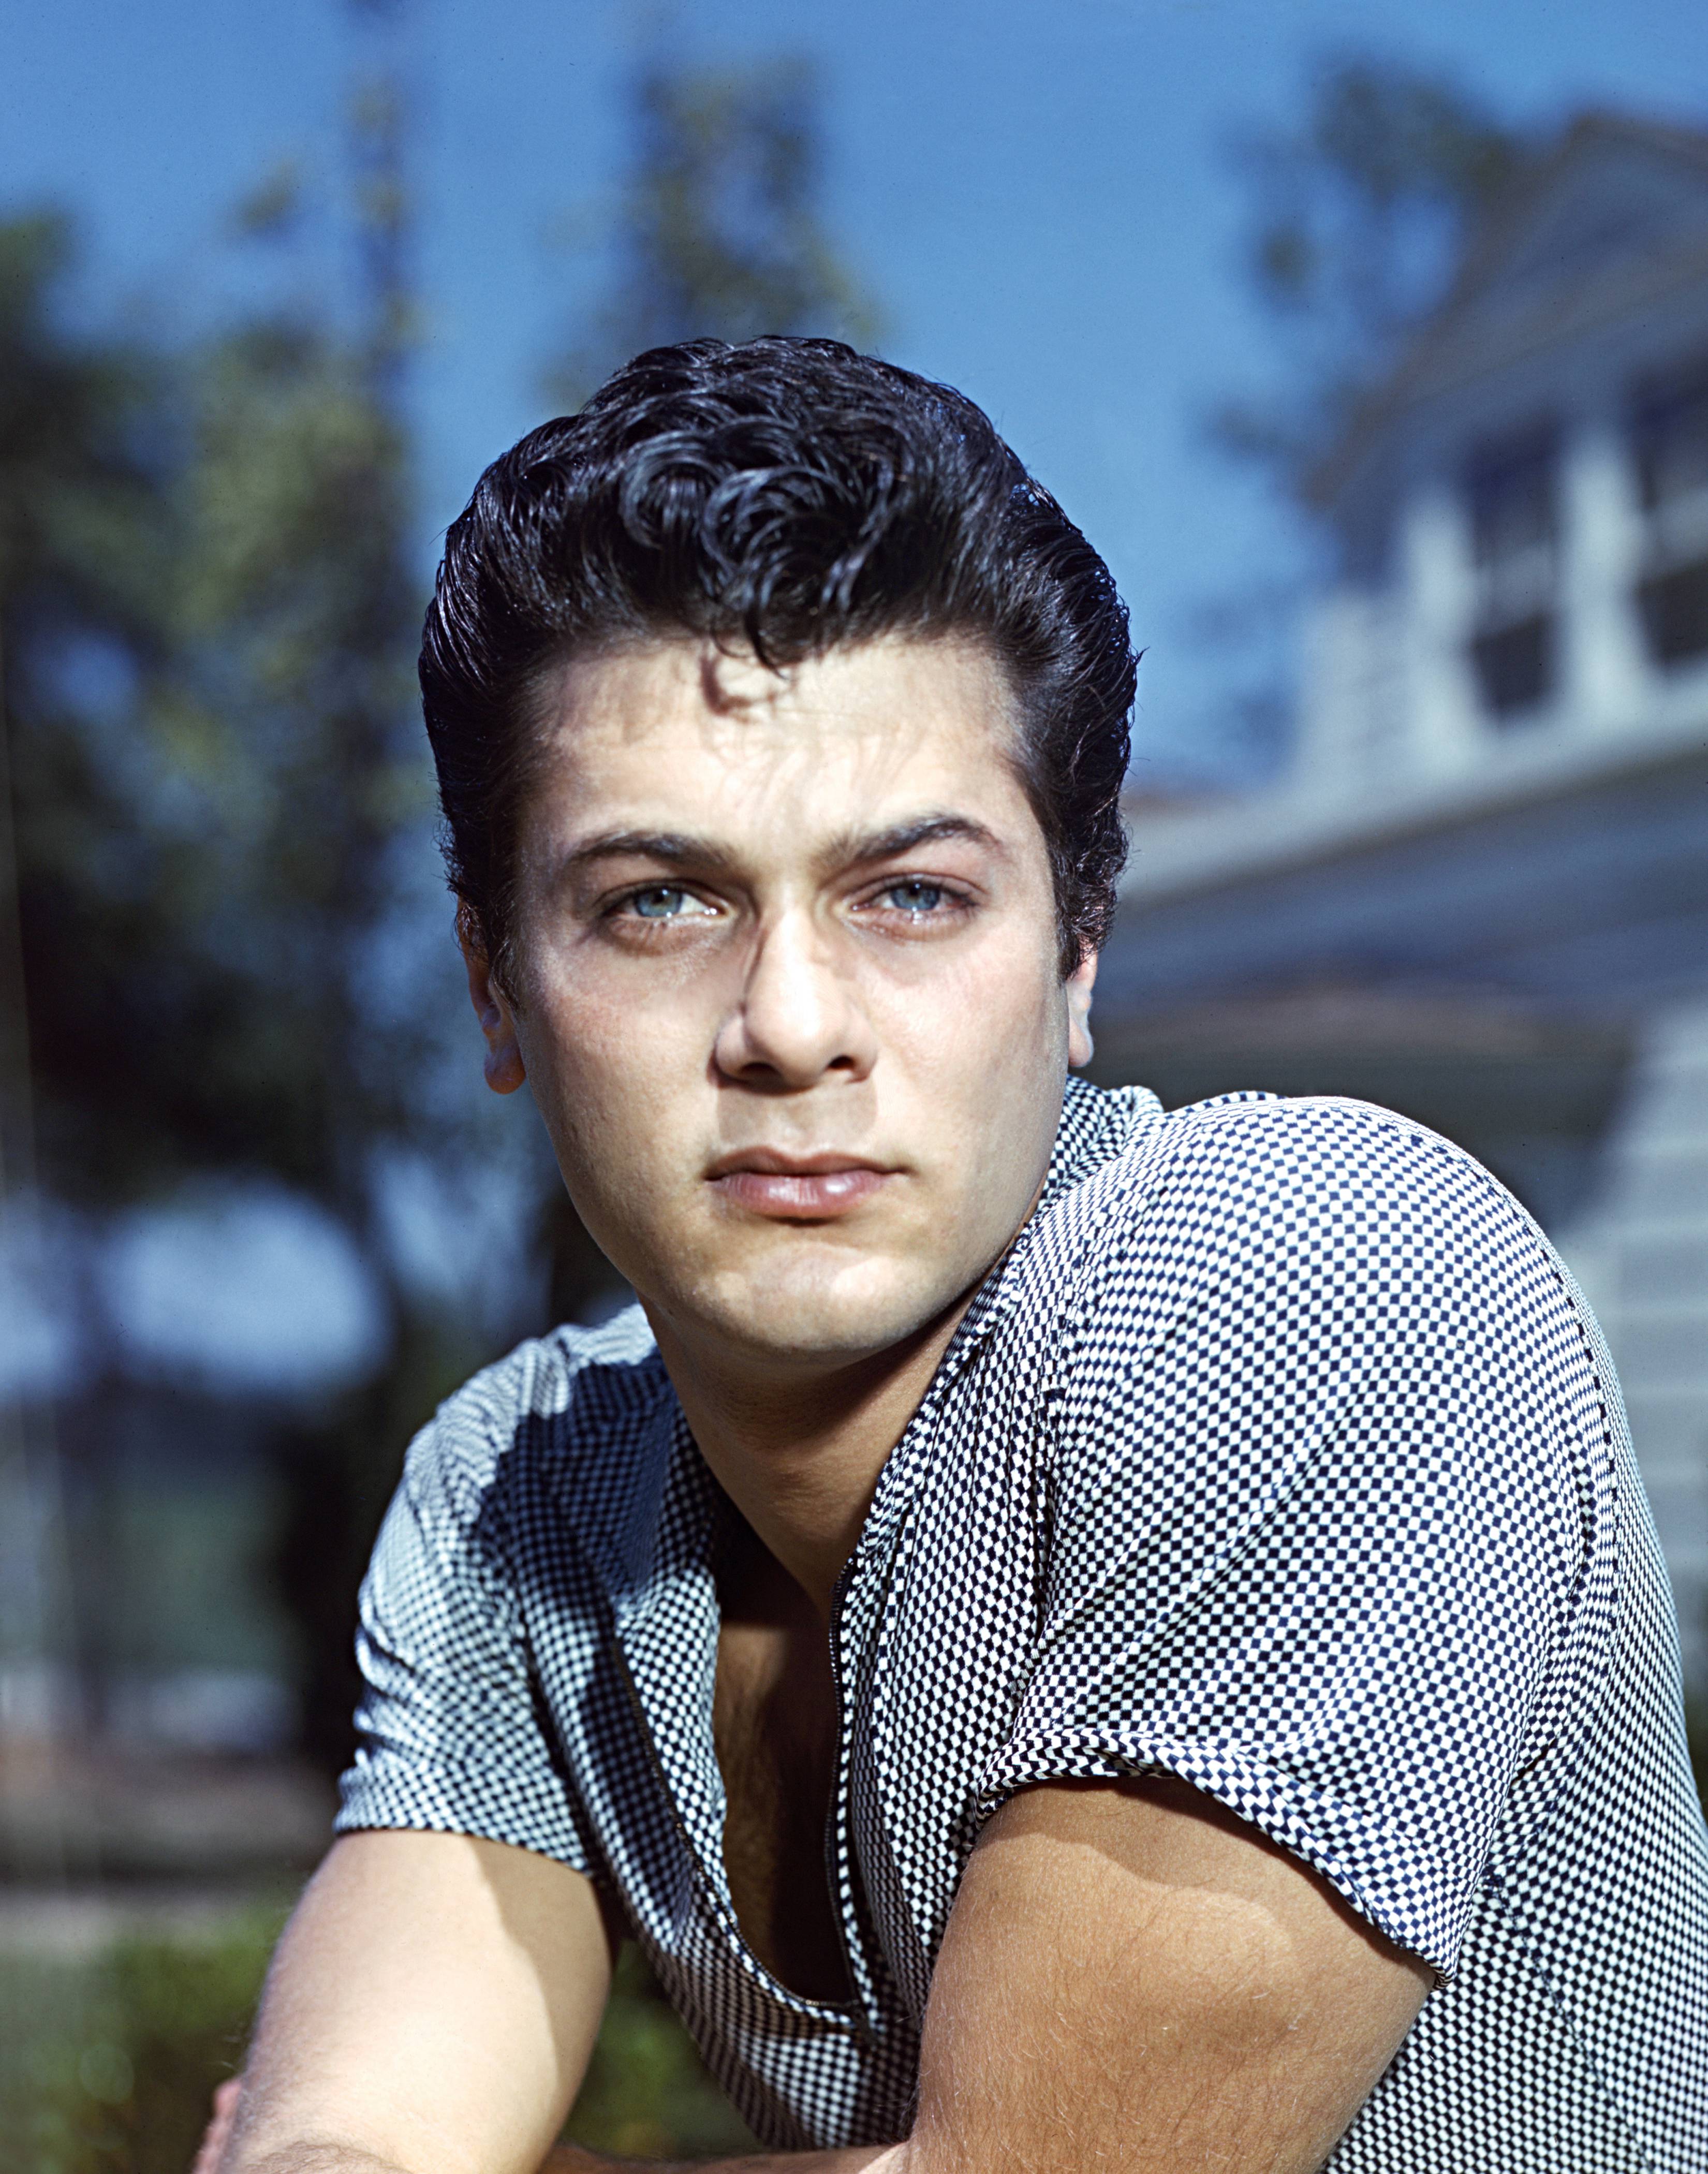 Tony Curtis posing for an image while wearing a short-sleeved black-and-white check shirt circa 1955 | Source: Getty Images